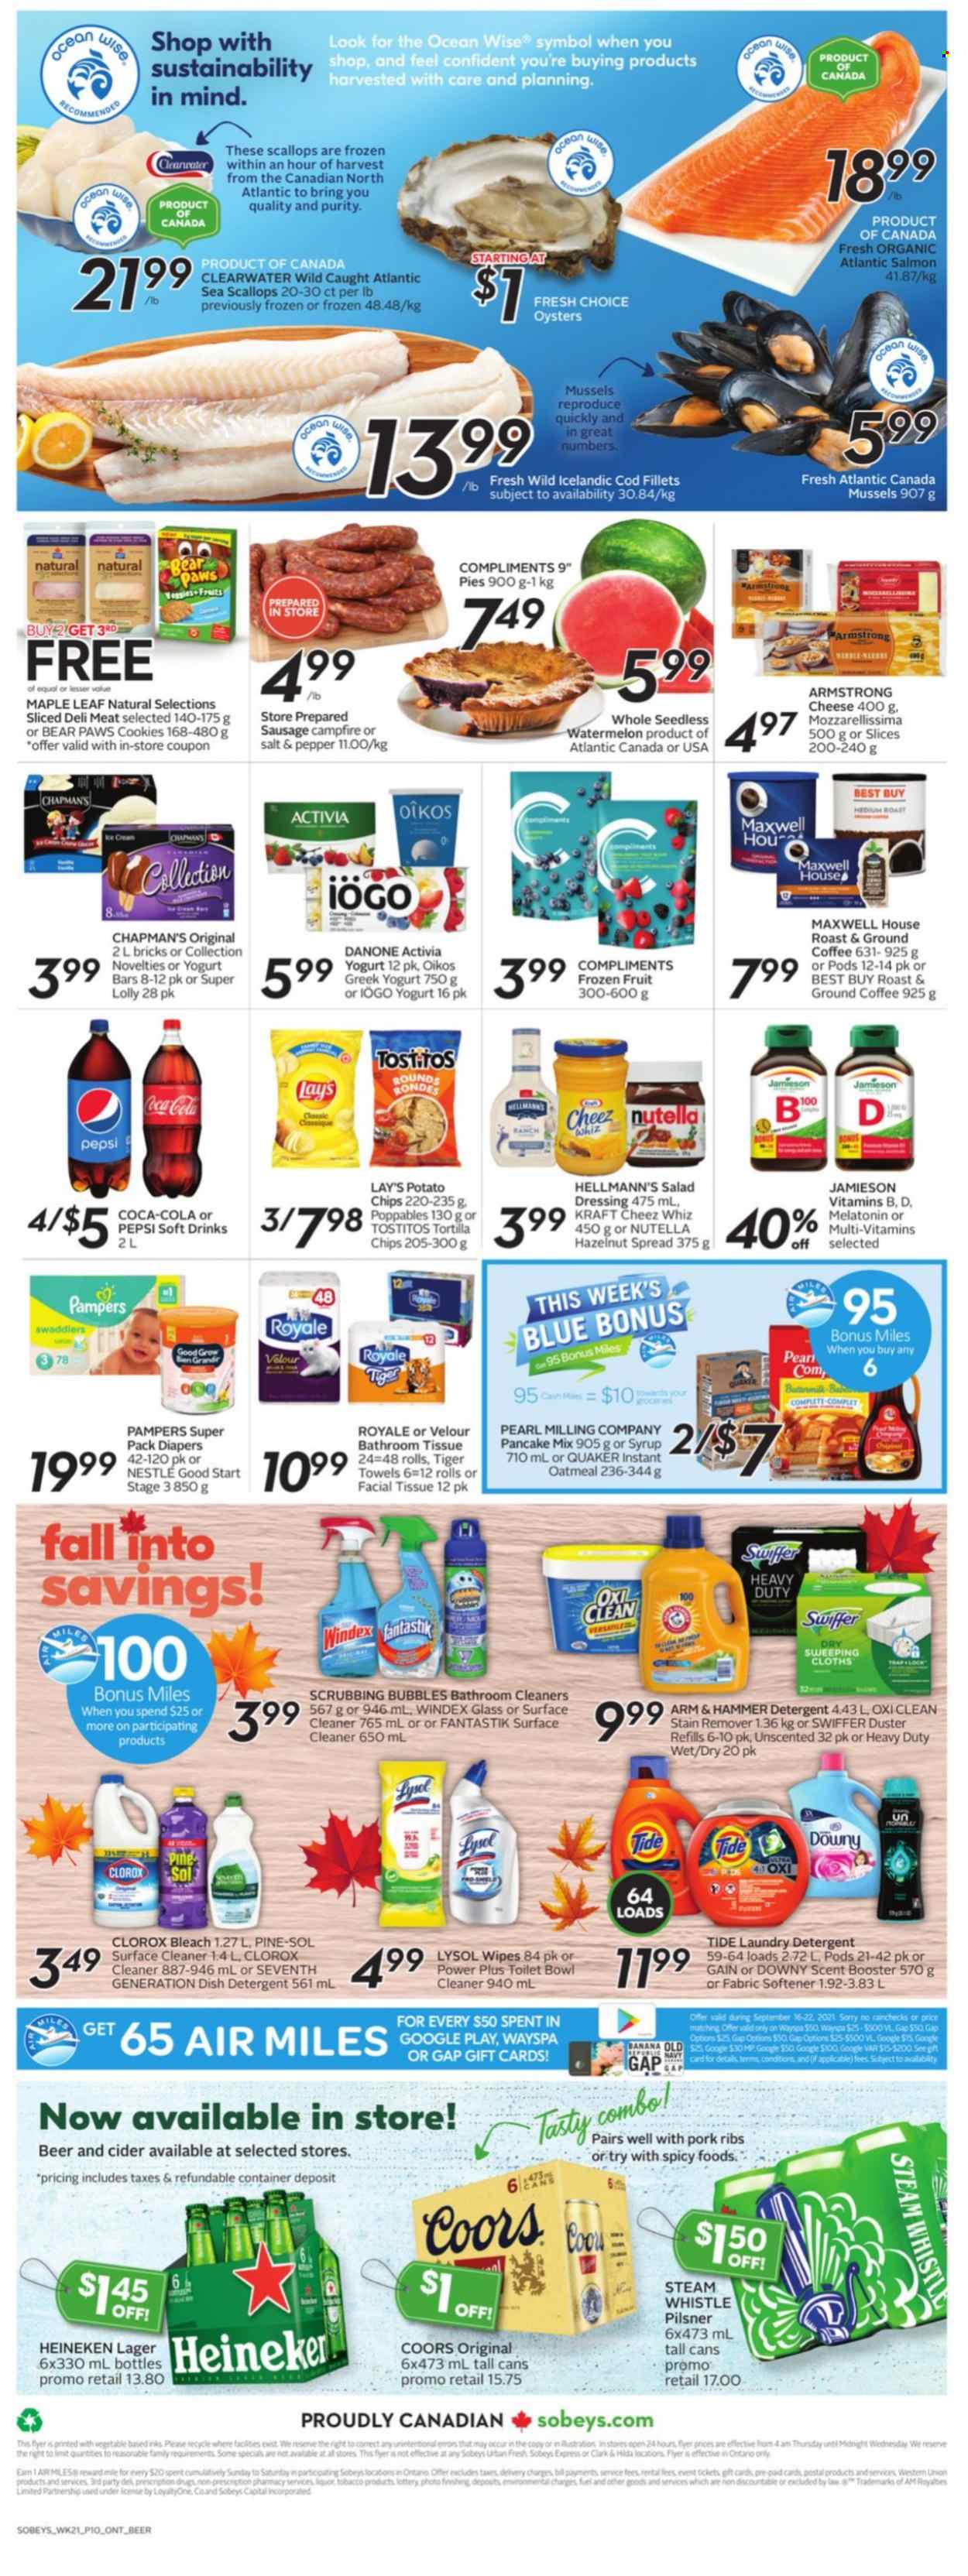 thumbnail - Sobeys Flyer - September 16, 2021 - September 22, 2021 - Sales products - watermelon, pears, cod, mussels, salmon, scallops, oysters, pancakes, Quaker, Kraft®, sausage, greek yoghurt, Activia, Oikos, Hellmann’s, cookies, lollipop, tortilla chips, potato chips, Lay’s, Tostitos, ARM & HAMMER, oatmeal, salad dressing, dressing, hazelnut spread, Coca-Cola, Pepsi, soft drink, Maxwell House, coffee, ground coffee, cider, beer, Heineken, Lager, Purity, pork meat, pork ribs, wipes, nappies, bath tissue, Gain, Windex, Scrubbing Bubbles, surface cleaner, cleaner, bleach, stain remover, Lysol, Clorox, Pine-Sol, Swiffer, Tide, fabric softener, laundry detergent, Downy Laundry, Paws, Melatonin, Danone, Nestlé, detergent, Pampers, Nutella, Coors. Page 2.